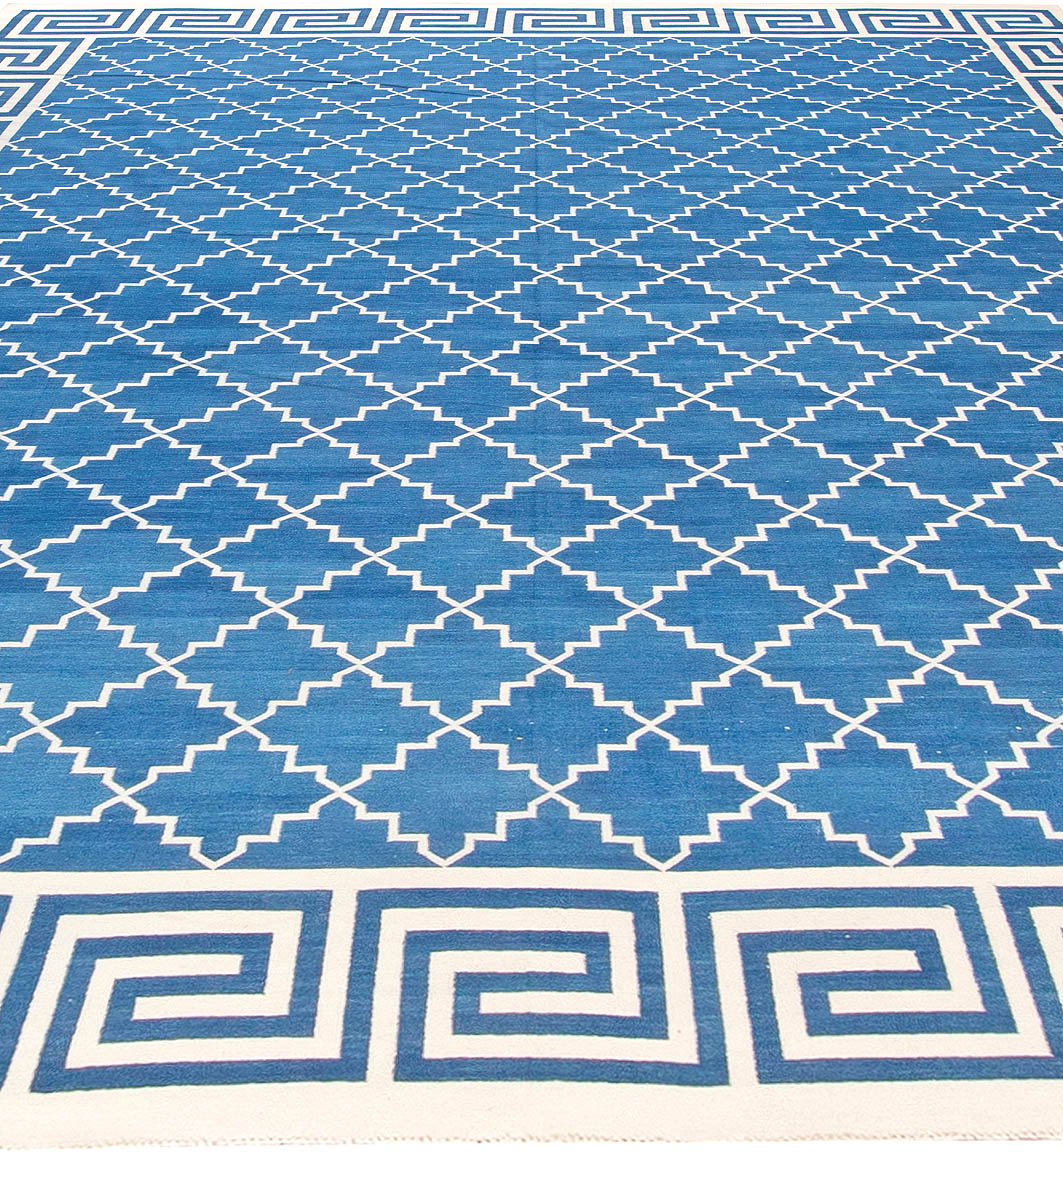 Contemporary Indian Dhurrie Blue and White Handwoven Cotton Rug N11016